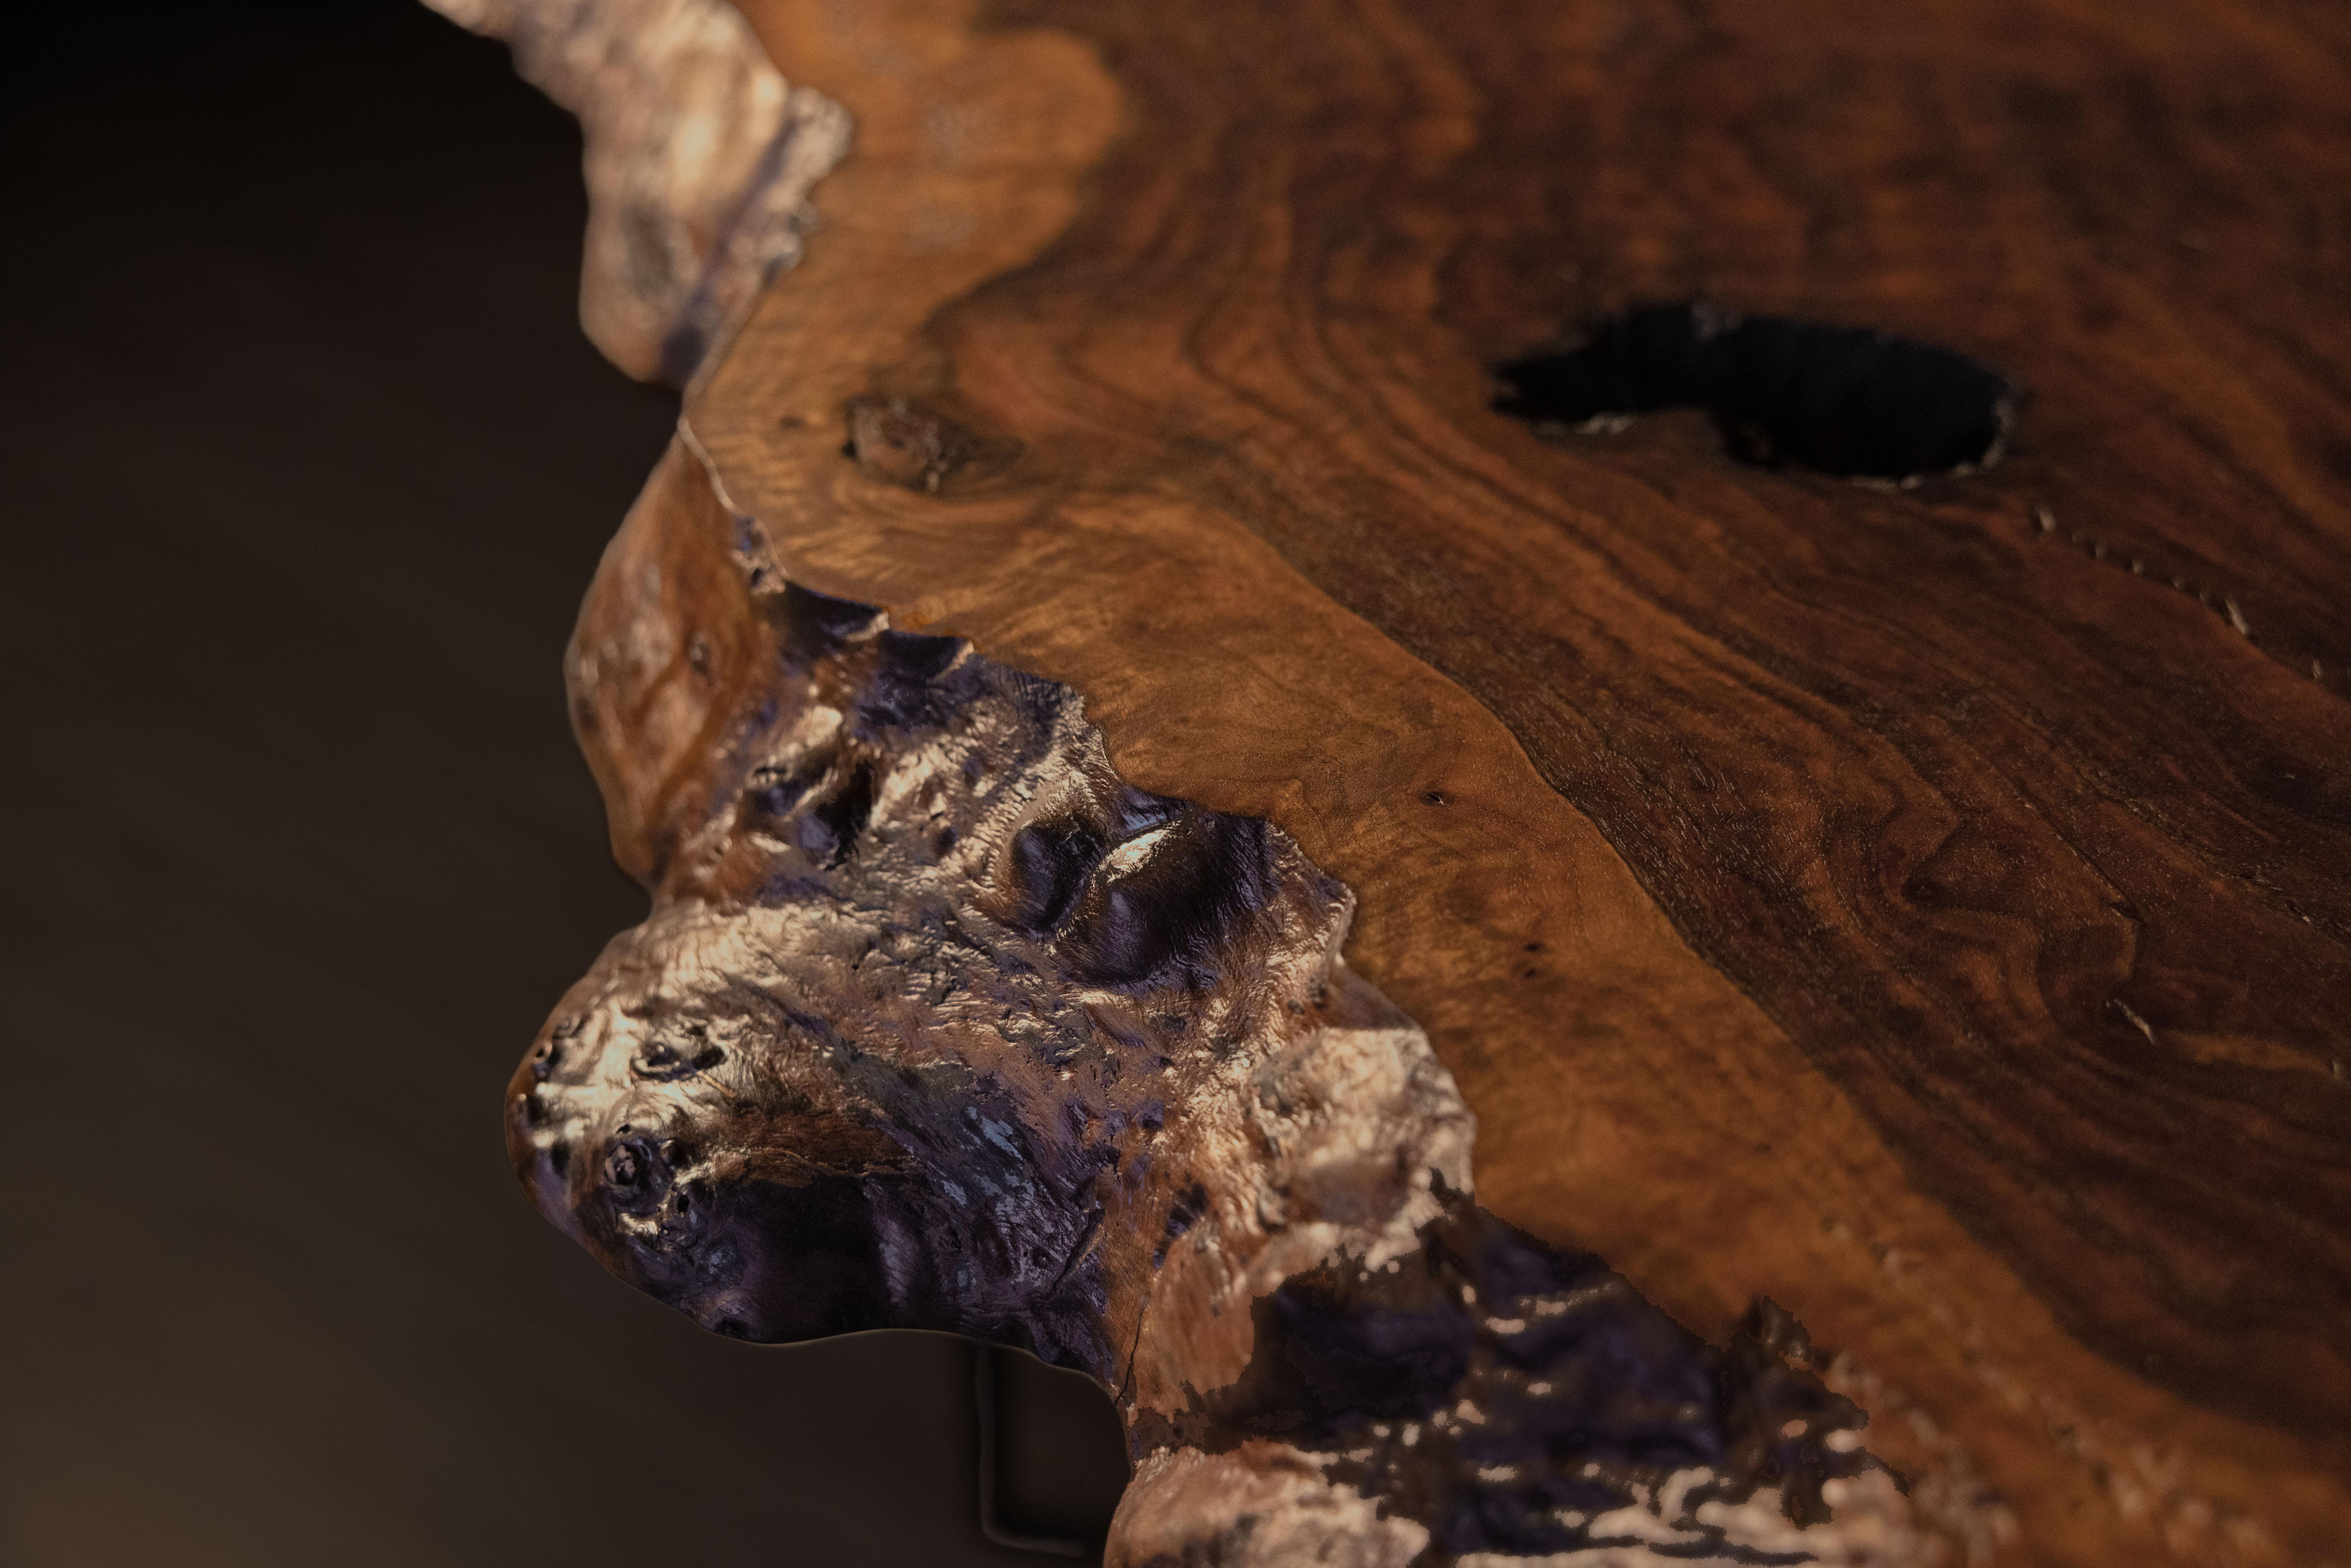 This is an exceptional Claro Walnut Burl Console, perfectly highlighting the beauty of Jeffrey’s hand-sculpted Forest Design. 

Creating a console with the Forest elements allows for the maximum visual impact. The rarity of the Claro Walnut Burl